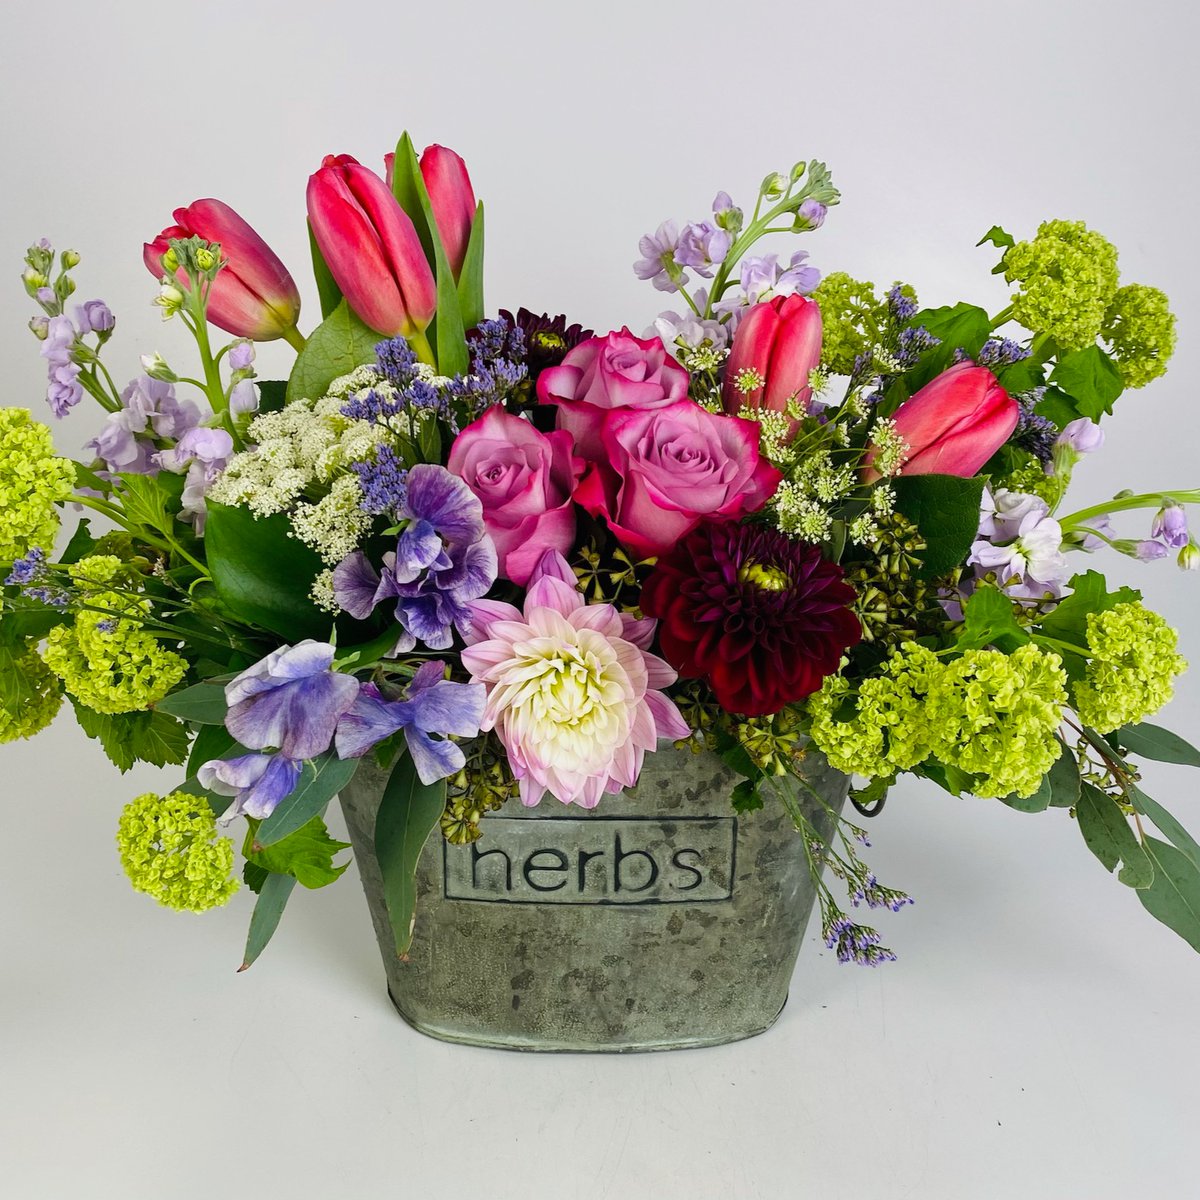 We are open today from 9 AM - 5 PM for you to stop by and pick up something special for mom! Can't get to the store? Call us at 703-281-4141 or visit karinsflorist.com to place your order. 💐 #MothersDay #OrderNow #FlowersForMom #Mothersday2024 #Florist #ViennaVA